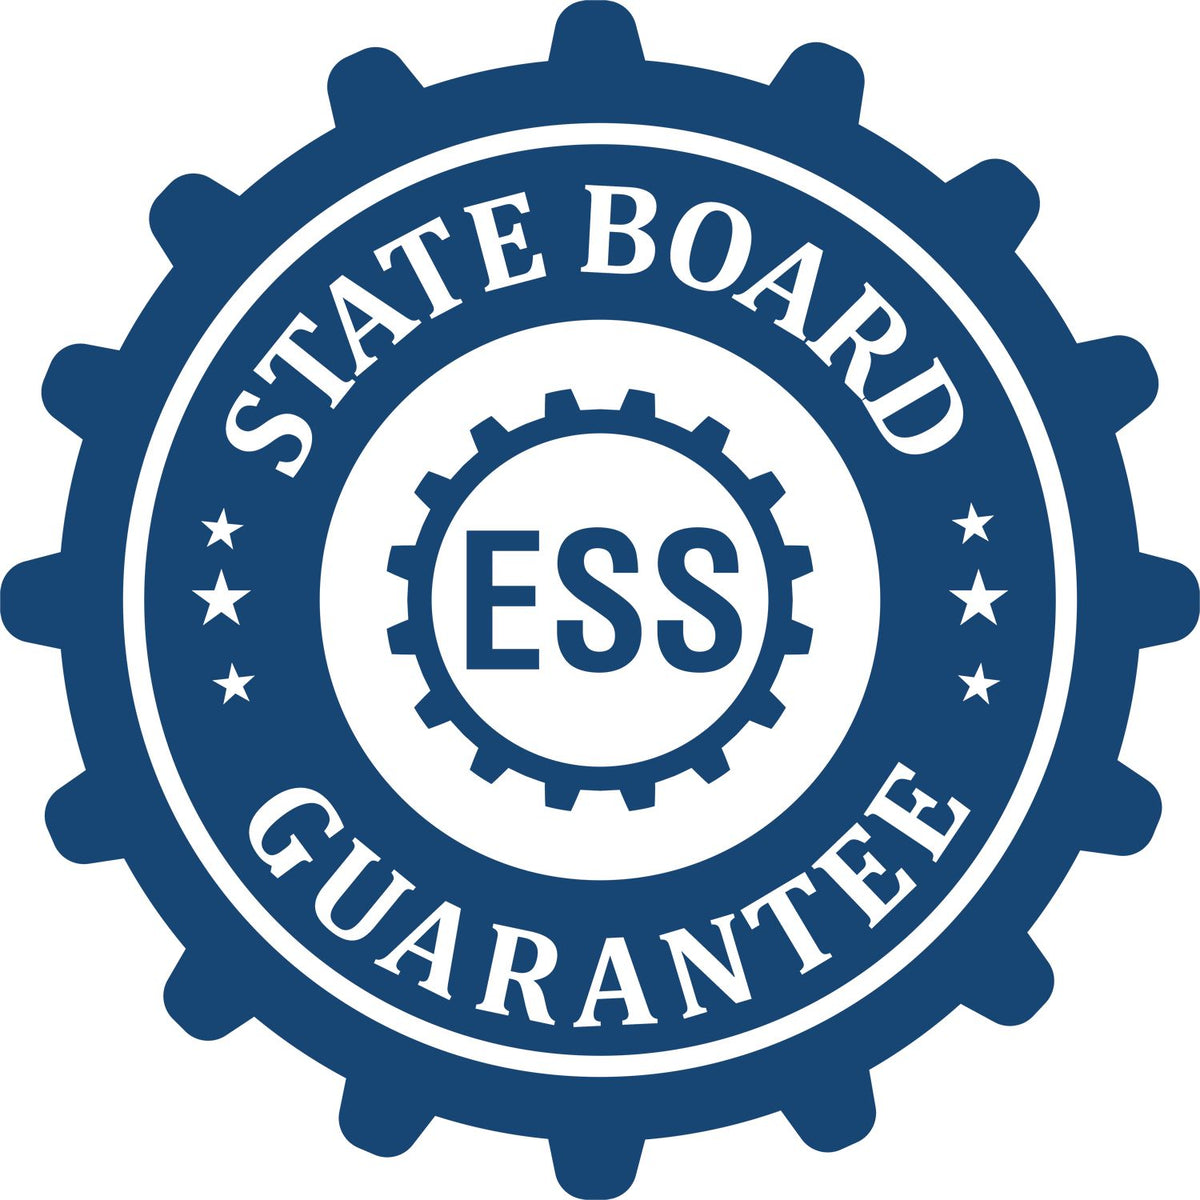 An emblem in a gear shape illustrating a state board guarantee for the Hybrid Rhode Island Land Surveyor Seal